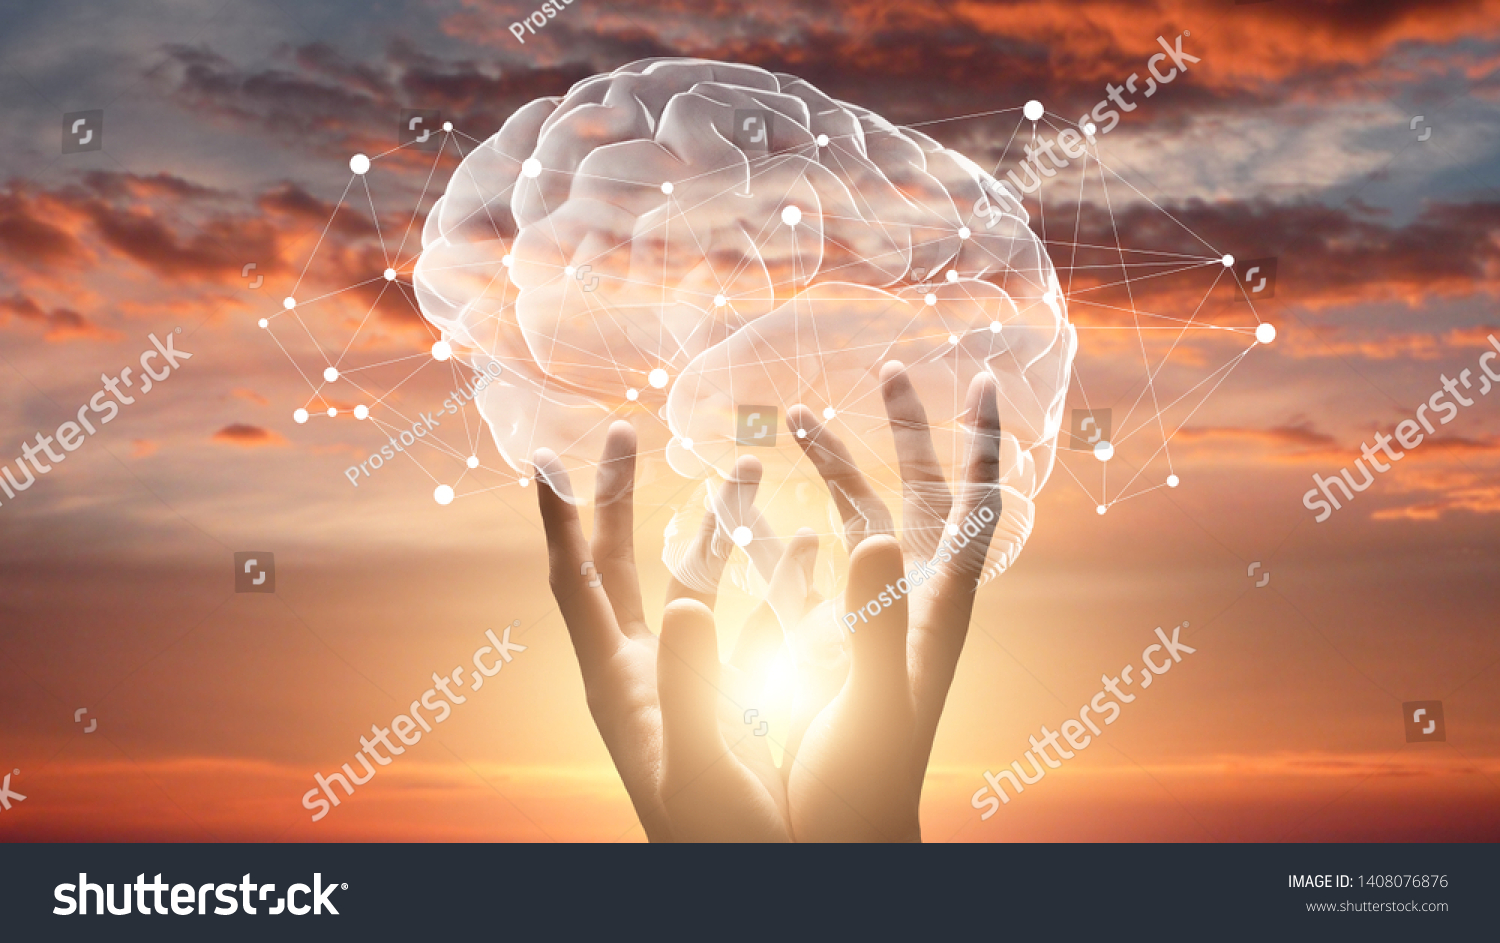 Mind and mental health. Female hands touching brain with network connections, sunset sky background #1408076876